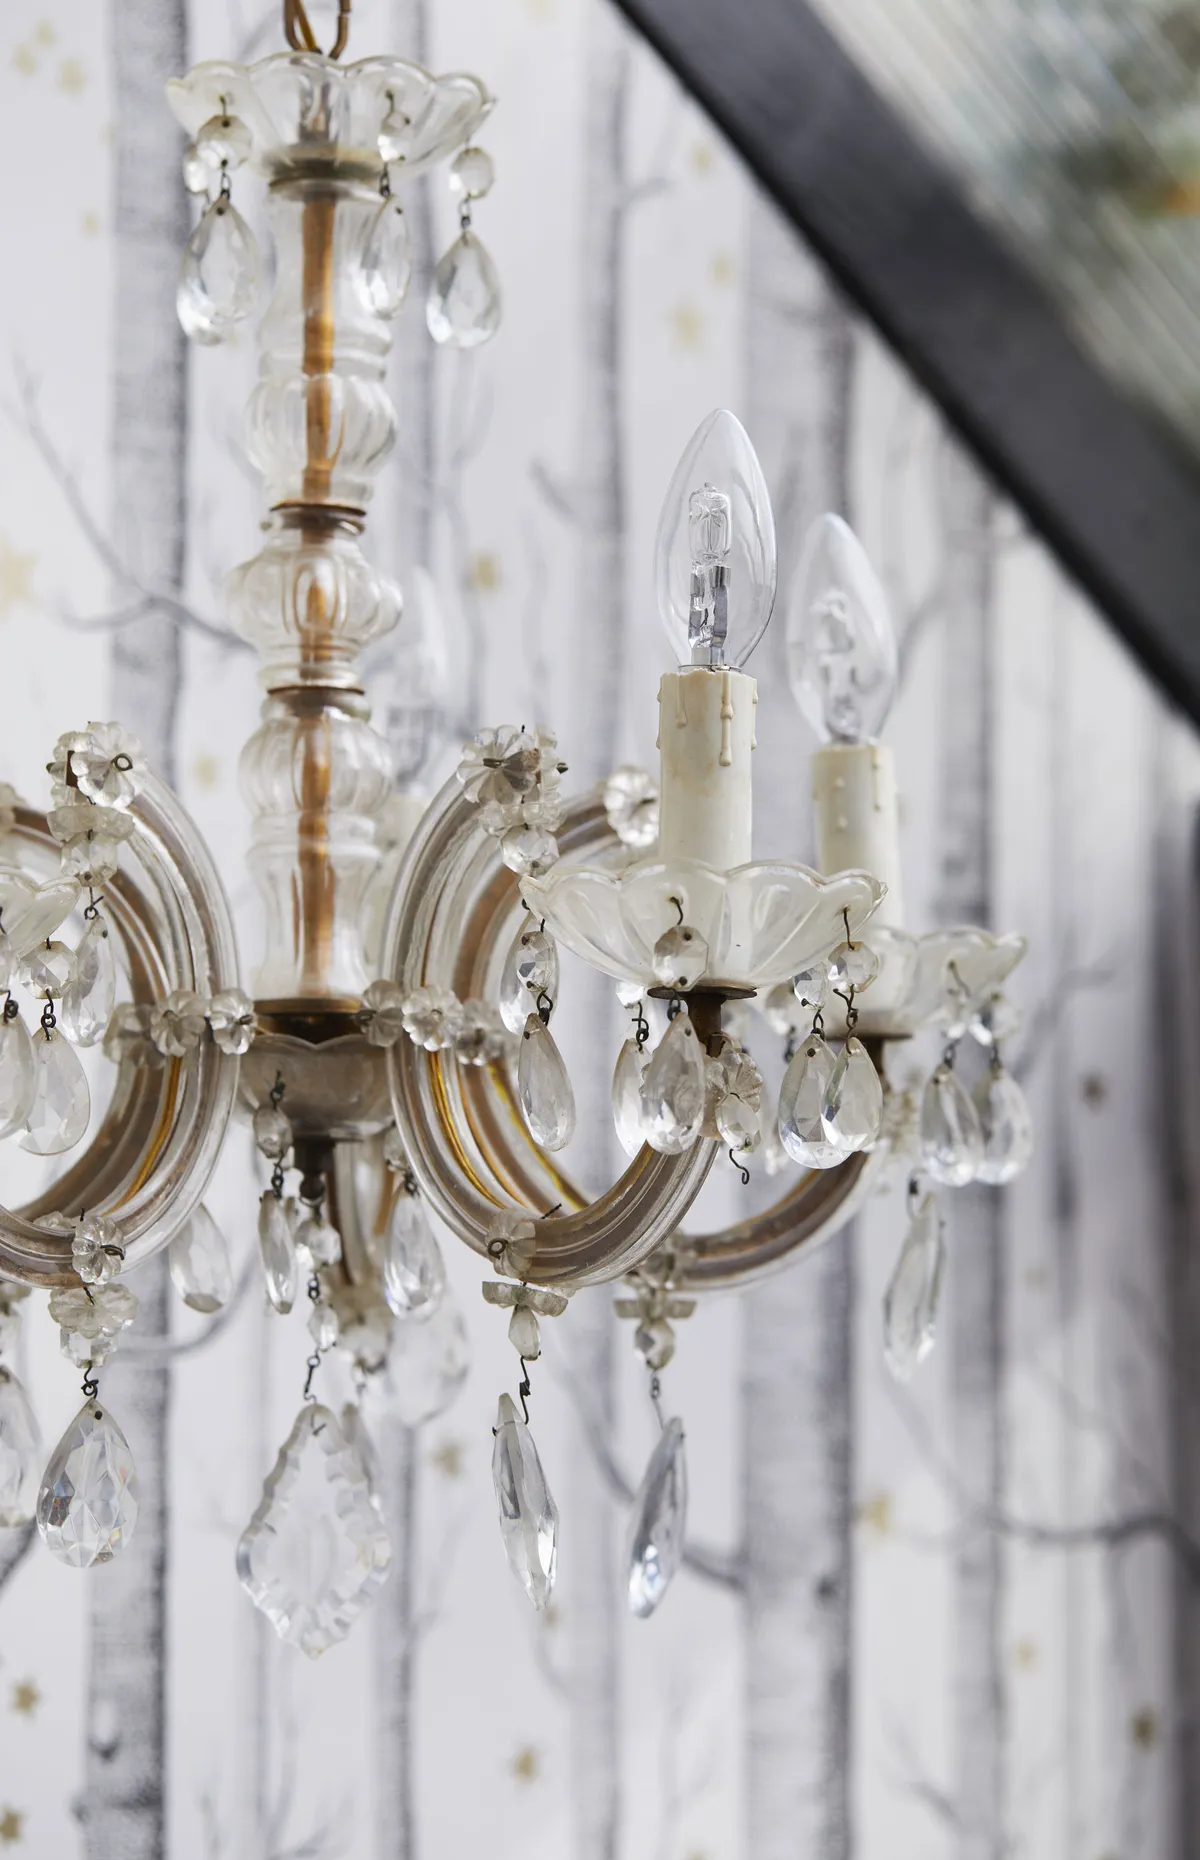 Kiara’s vintage glass chandelier was originally bought on eBay and adds an unexpected glitzy detail to this rustic scheme